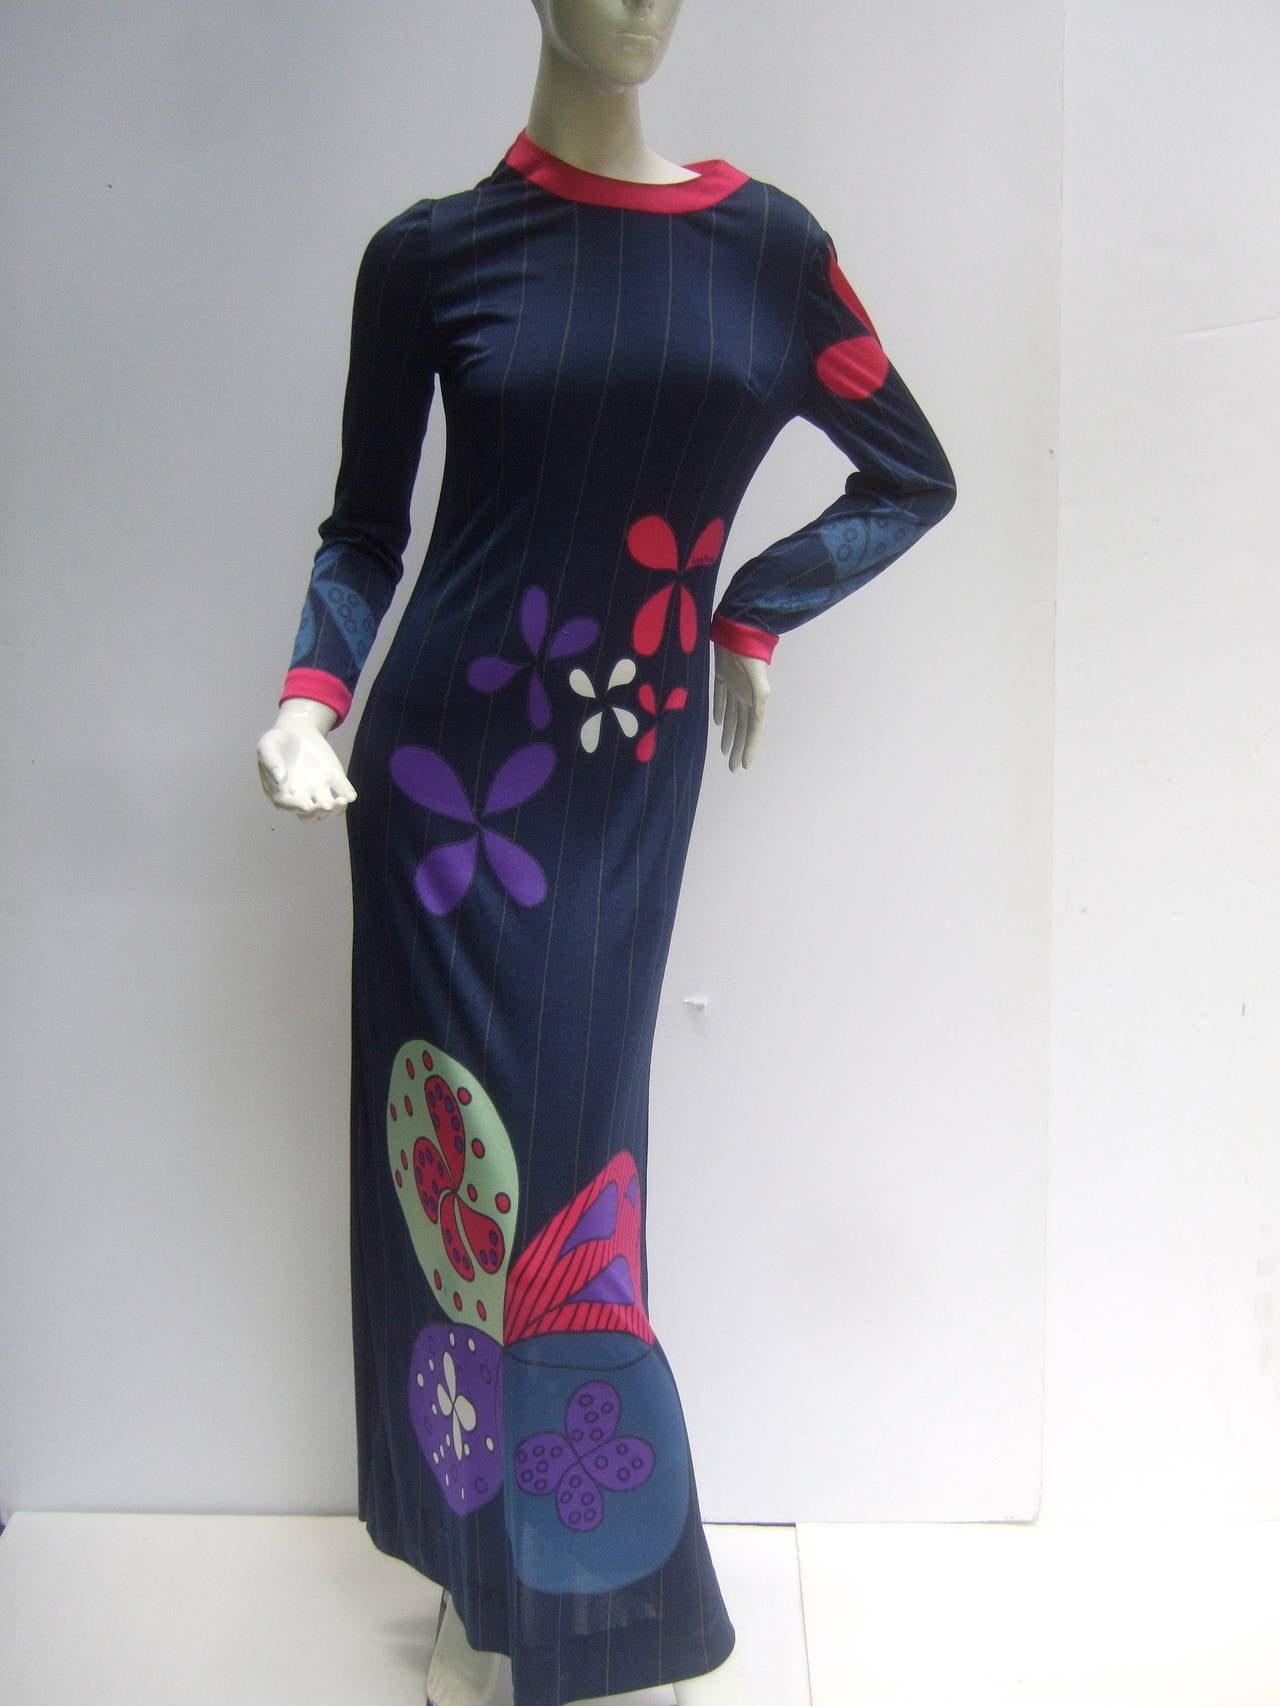 Louis Feraud Paris Fabulous mod jersey knit print maxi gown c 1960s
The chic vintage knit gown is infused with lucious colors amid
floral pedals and abstract graphics. The sexy slinky knit gown  
epitomizes the flower power & freedom of swinging